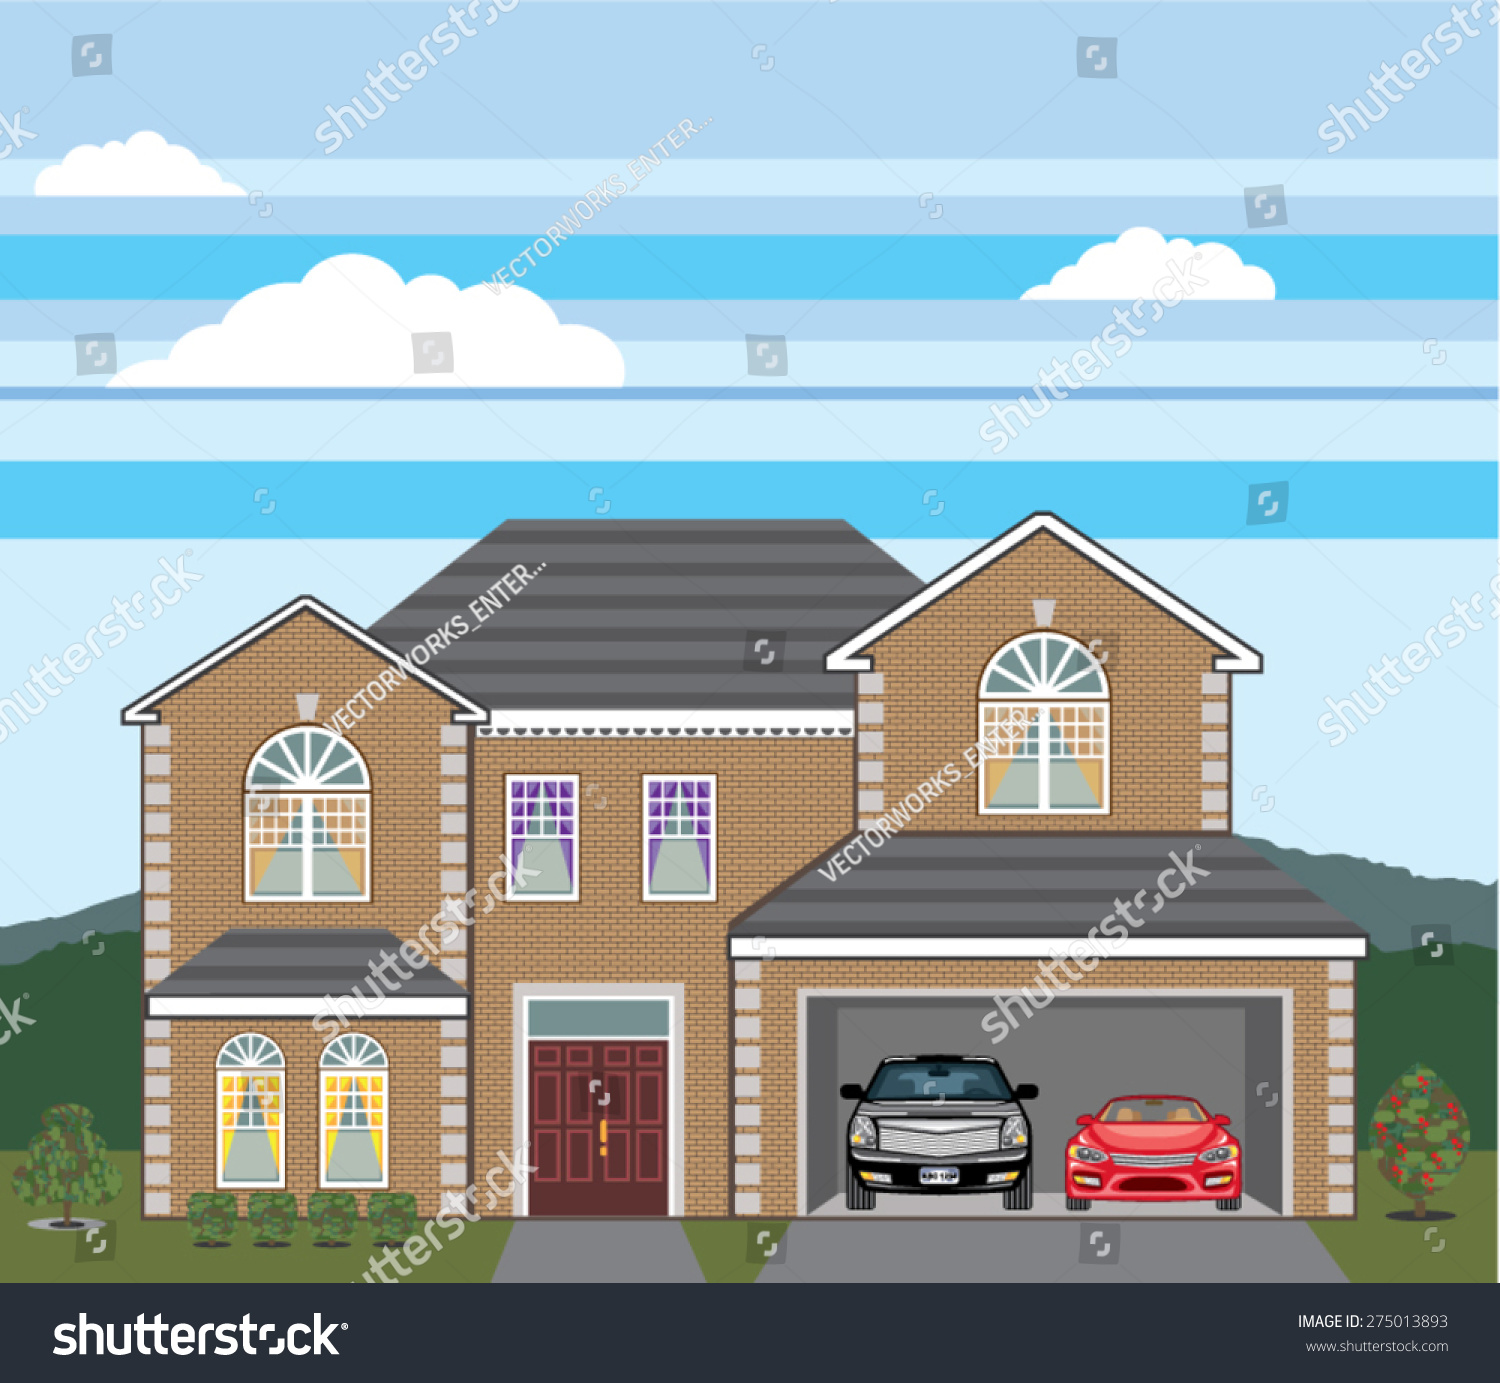 house with garage clipart - photo #22